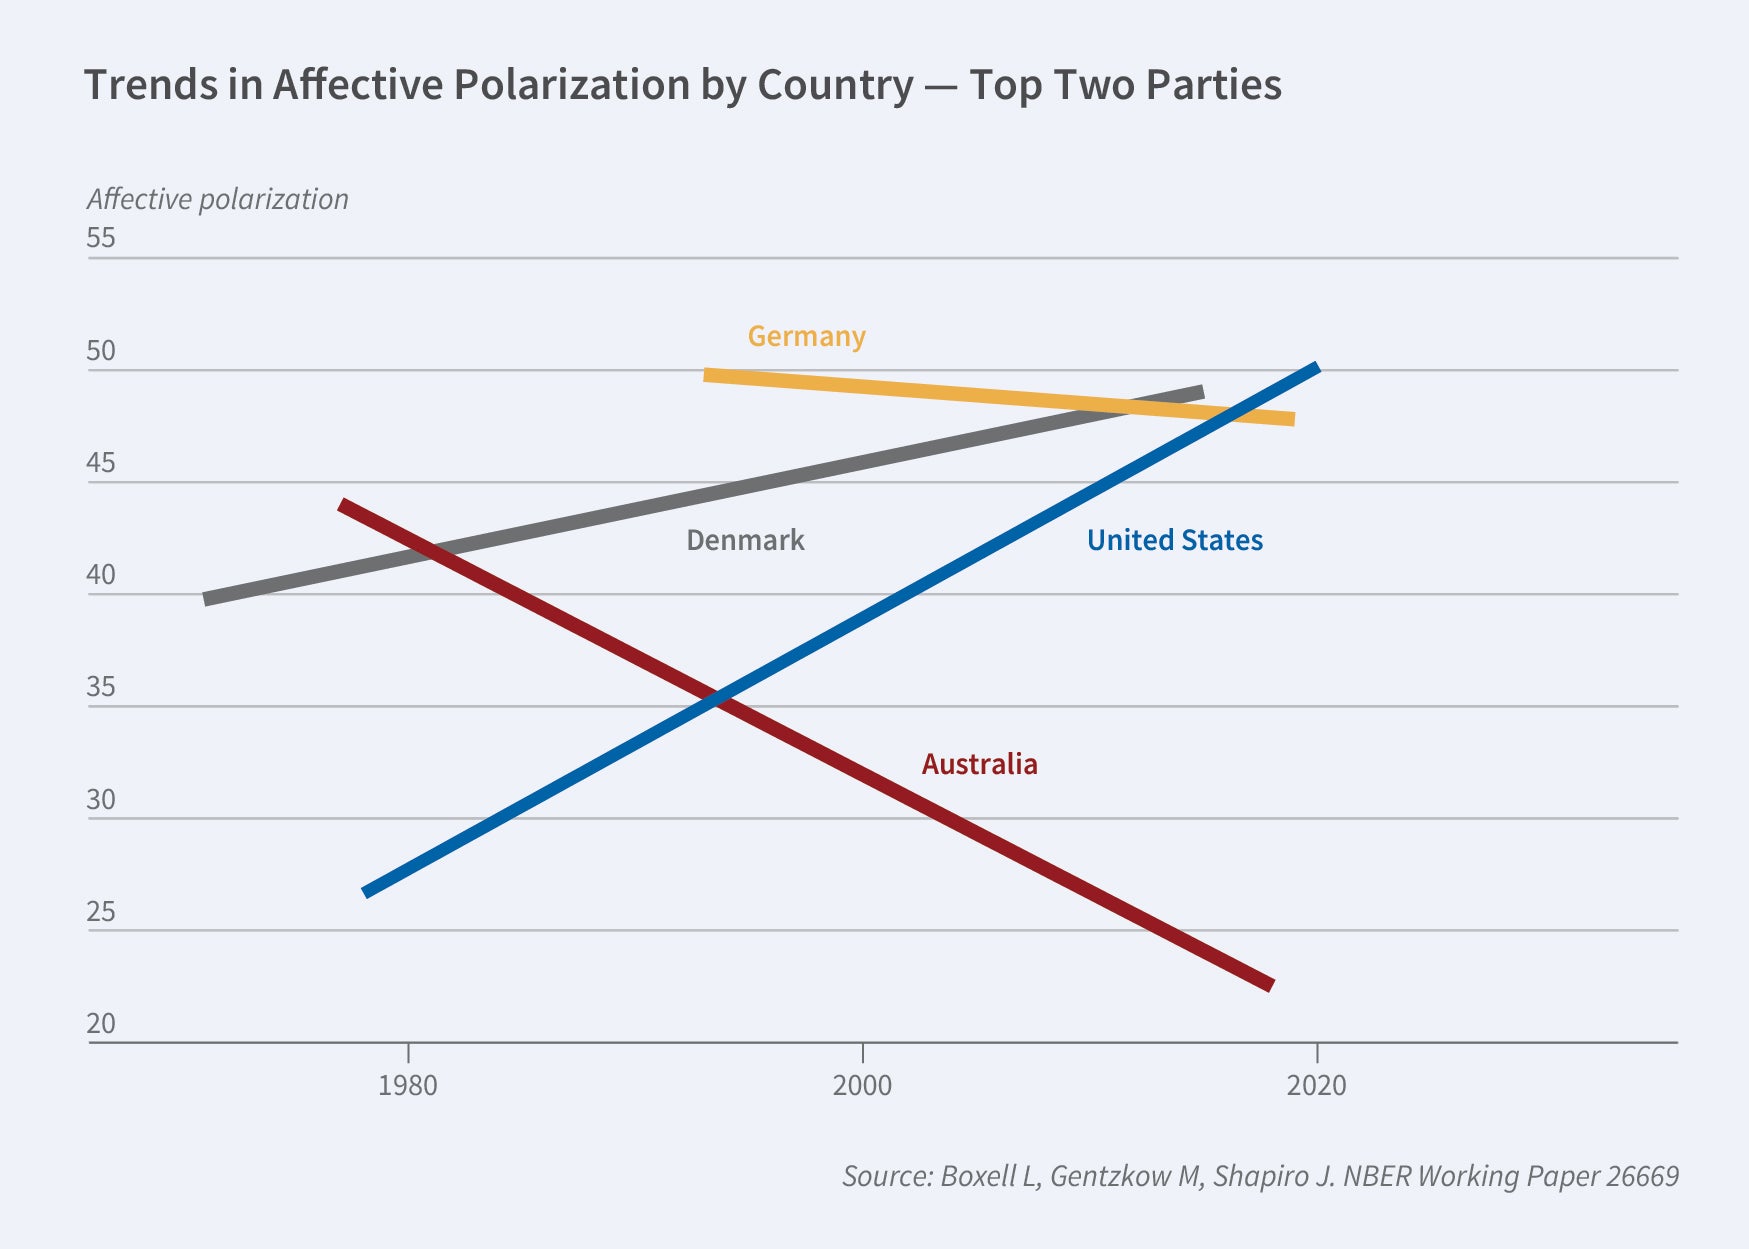 Program Report Figure 1: This is a line graph titled Trends in Affective Polarization by Country - Top Two Parties.  The y-axis is labeled Affective polarization and ranges from 20 to 55.  The x-axis is years and ranges from 1980 to 2020.  There are 4 lines of data, representing Germany, Denmark, Australia, and the United States.  Germany started midway between 1980 and 2000 at approximately 50 and experienced a slight decline to about 47 in 2020.  Denmark started prior to 1980 at about 40 and finished at about 48 midway between 2000 and 2020.  Australia started at around 44 in 1980 and experienced a steep decline under 25 around 2020.  The United States started at about 26 in 1980 and experienced a steep increase to 50 in 2020.  The source line reads Source: Boxell L, Gentzkow M, Shapiro J. NBER Working Paper 26669.